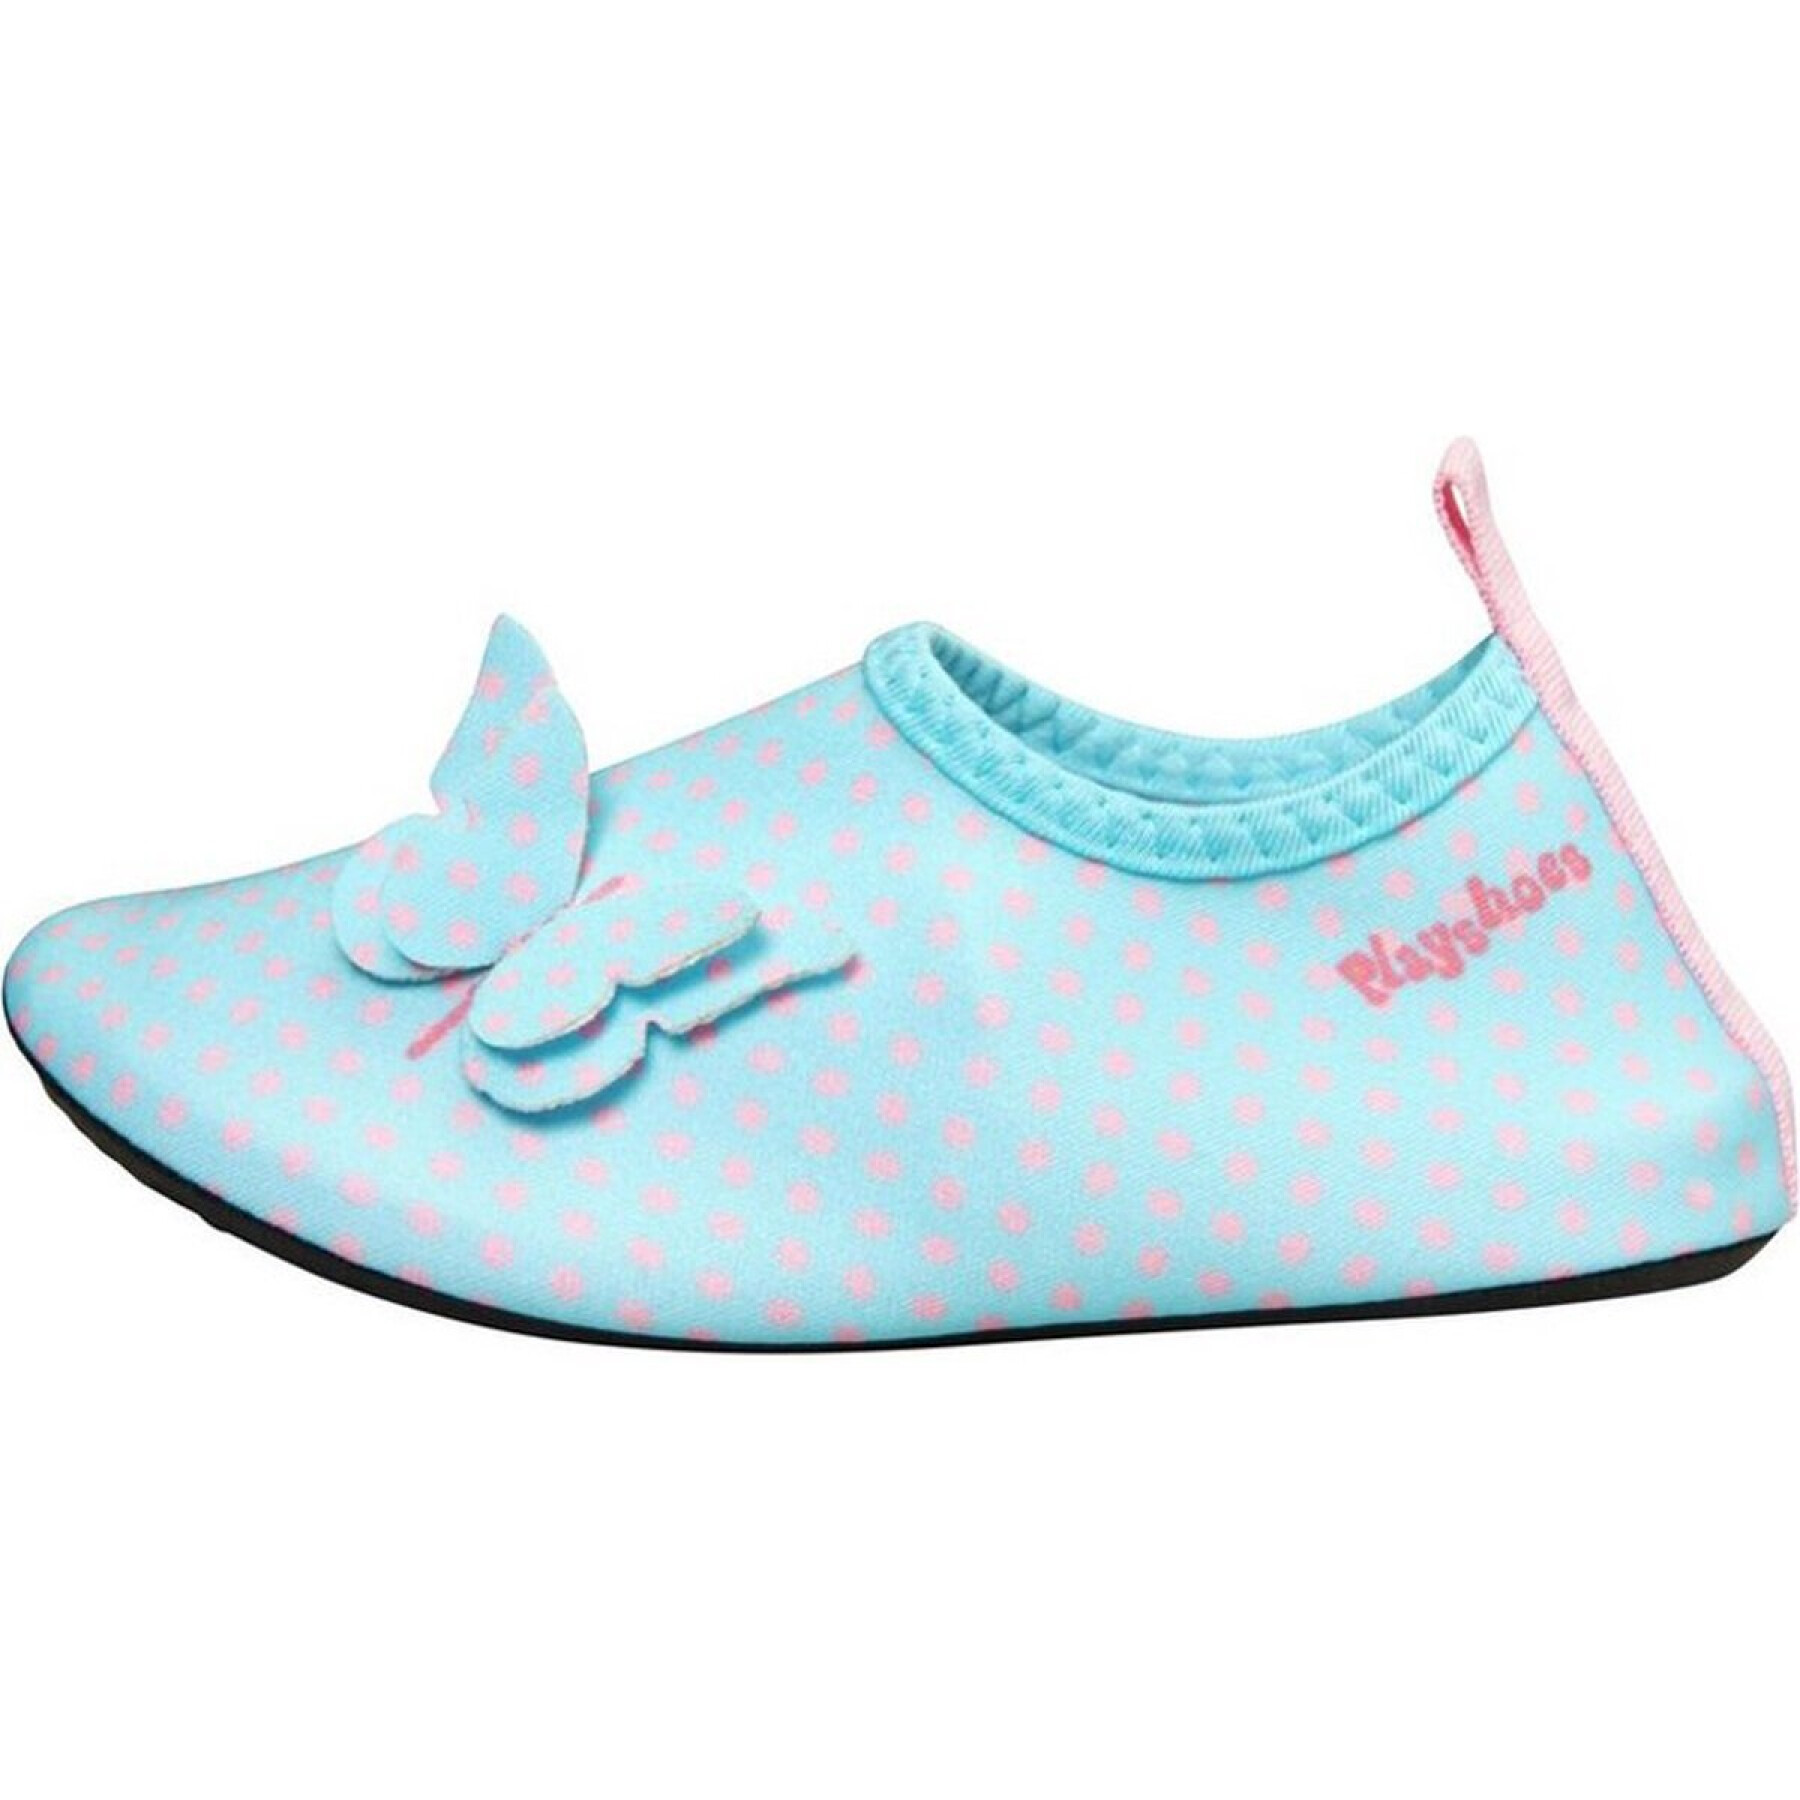 Baby girl aquatic slippers Playshoes Butterfly